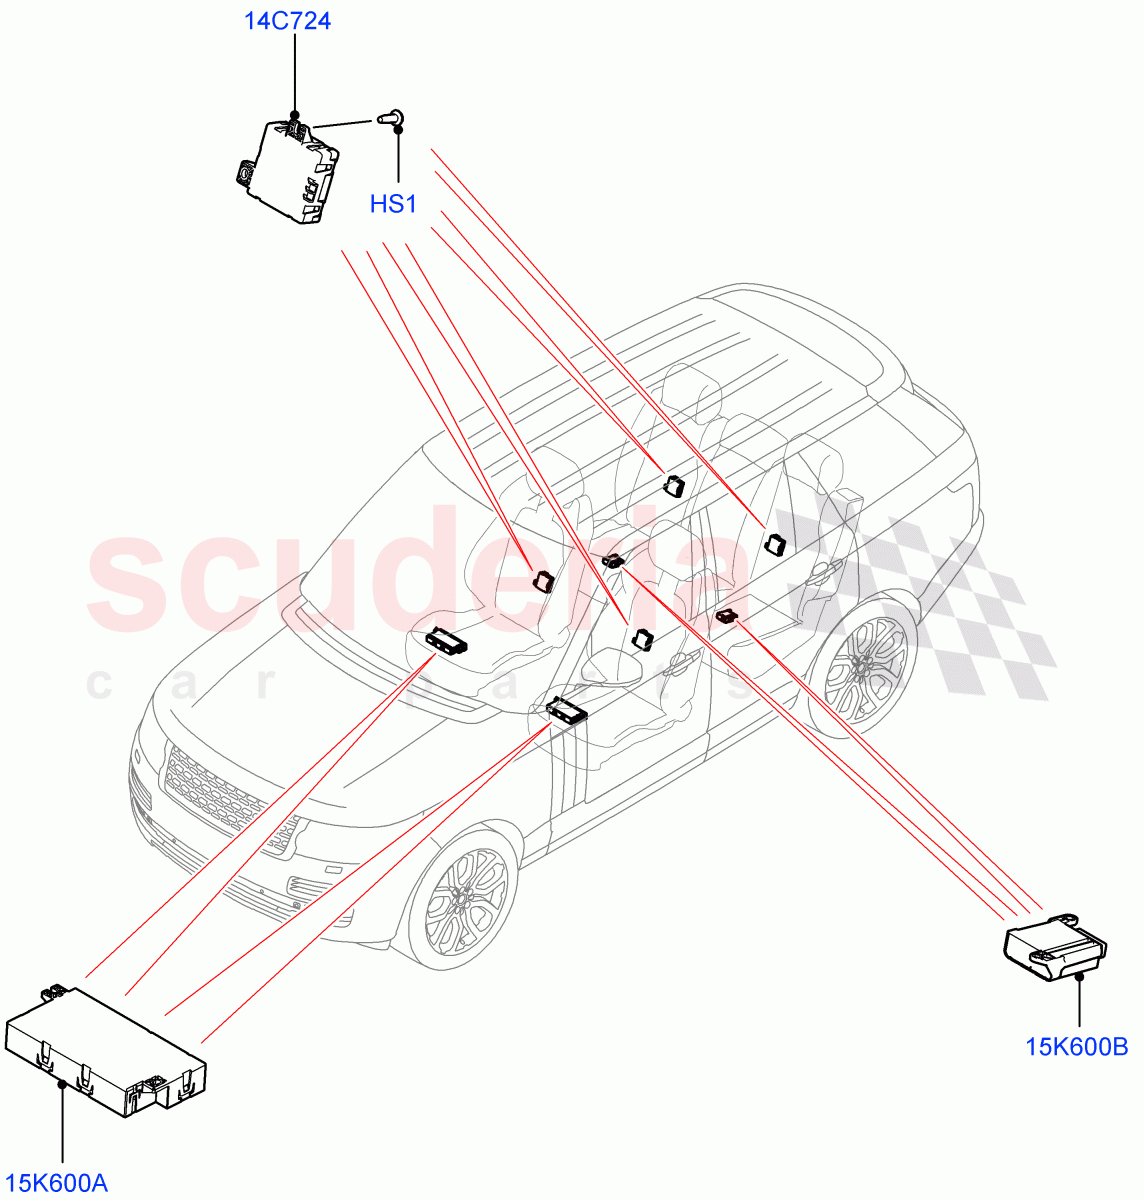 Vehicle Modules And Sensors(Seats)((V)FROMJA000001) of Land Rover Land Rover Range Rover (2012-2021) [4.4 DOHC Diesel V8 DITC]